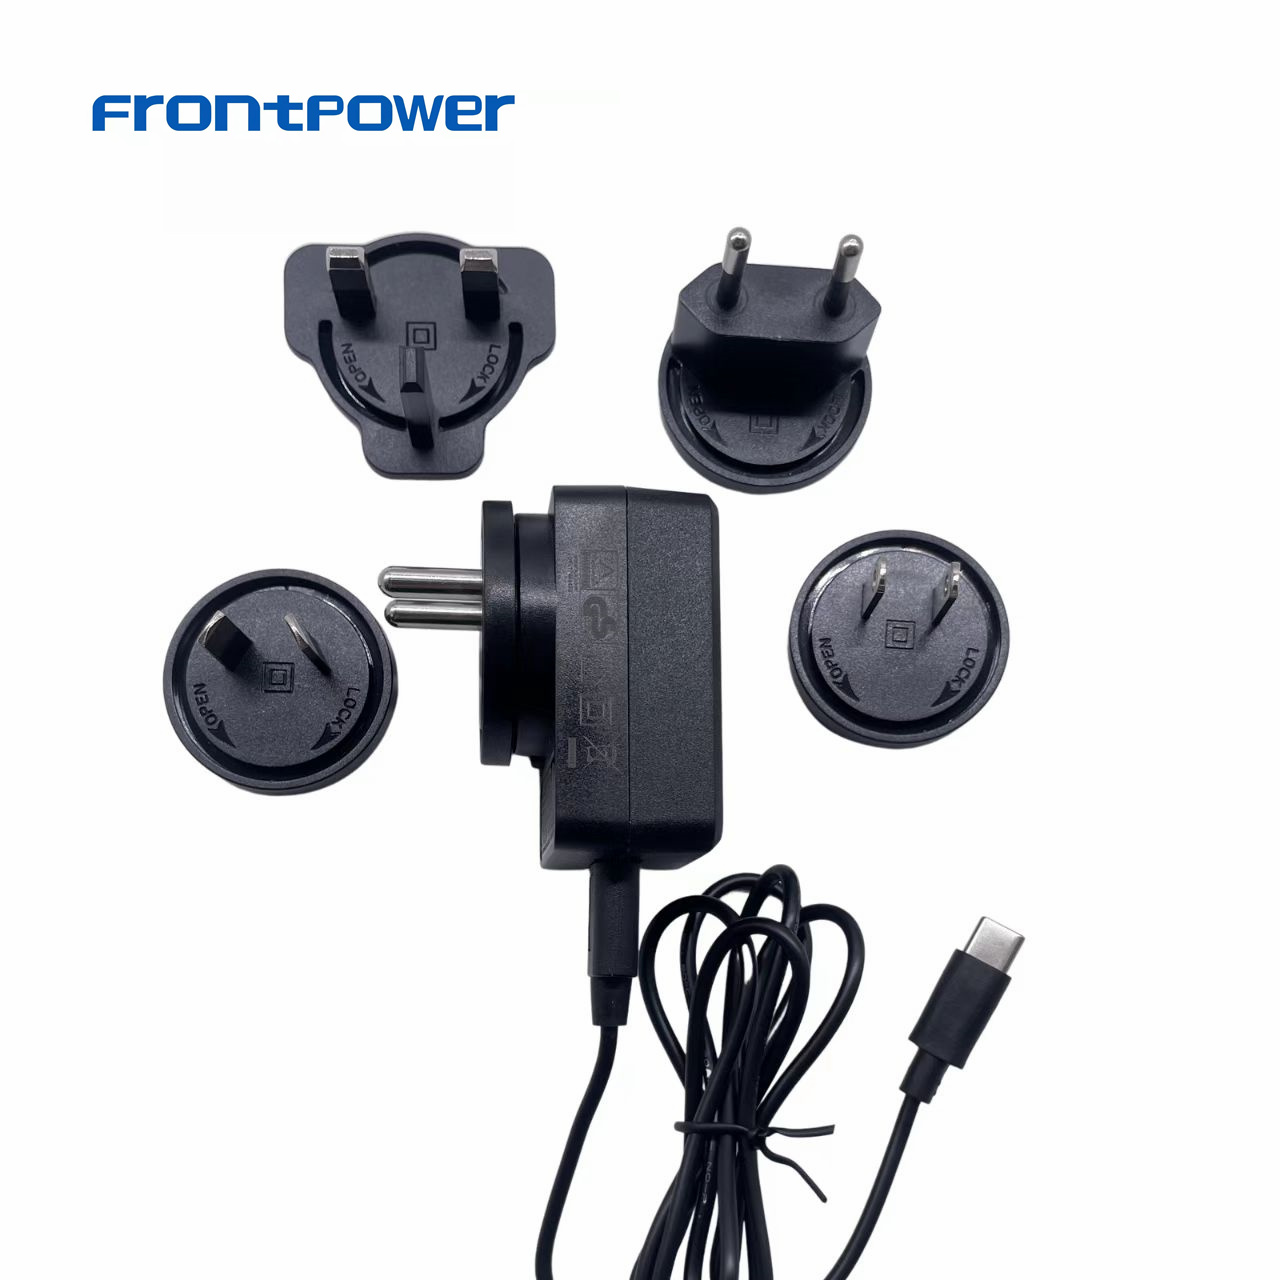 5v 2.5a detachable type bis power adapter with BIS certification for Indian market